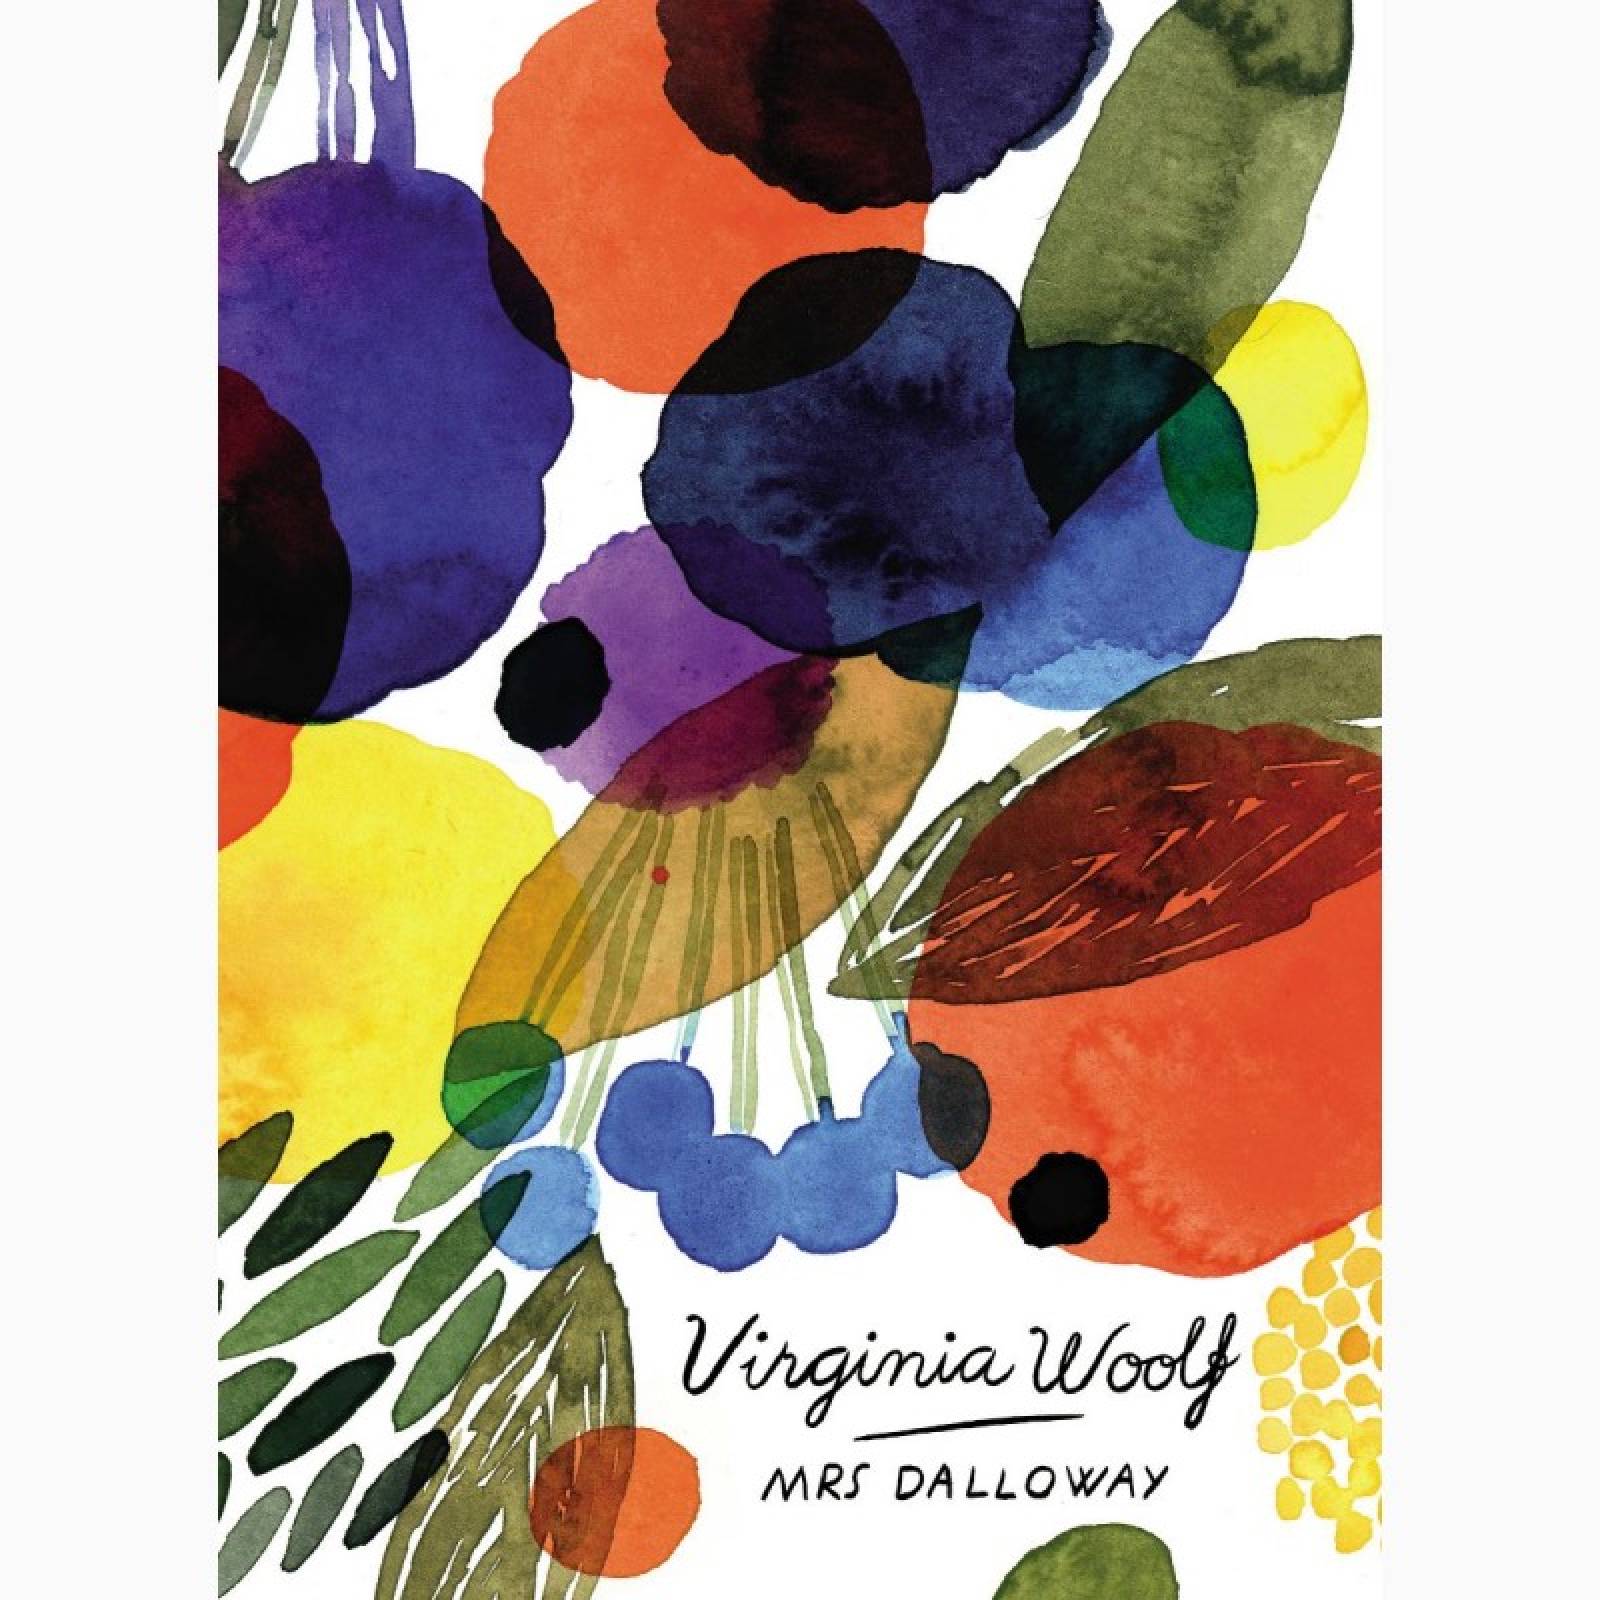 Mrs Dalloway By Virginia Woolf - Paperback Book